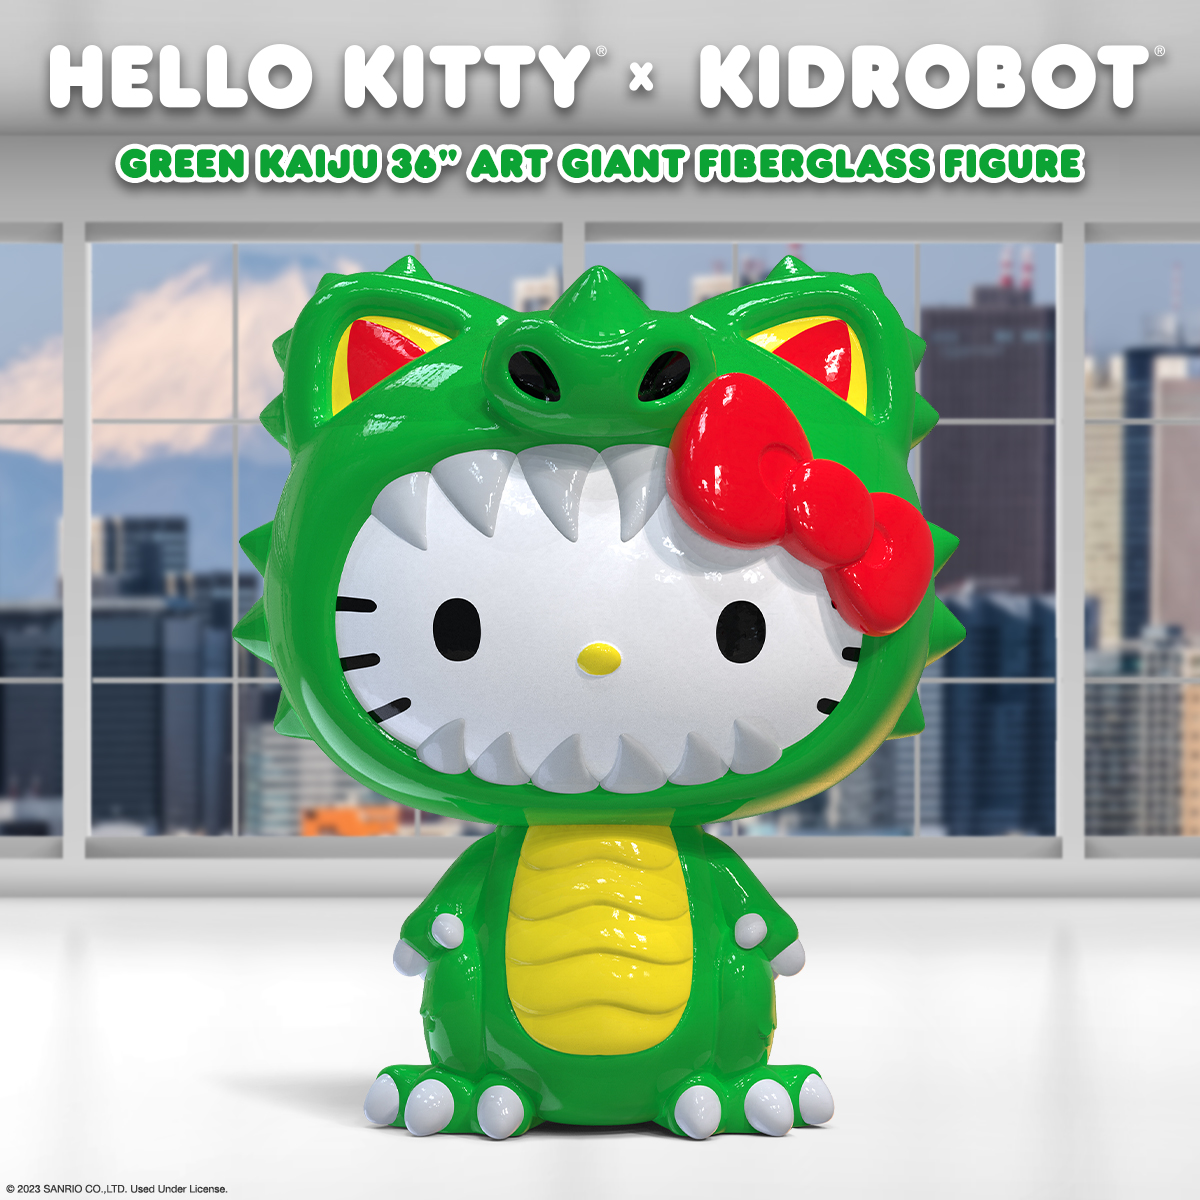 Kidrobot x Hello Kitty Toys Collection - Limited Edition plush, toys and Collectibles at Kidrobot.com